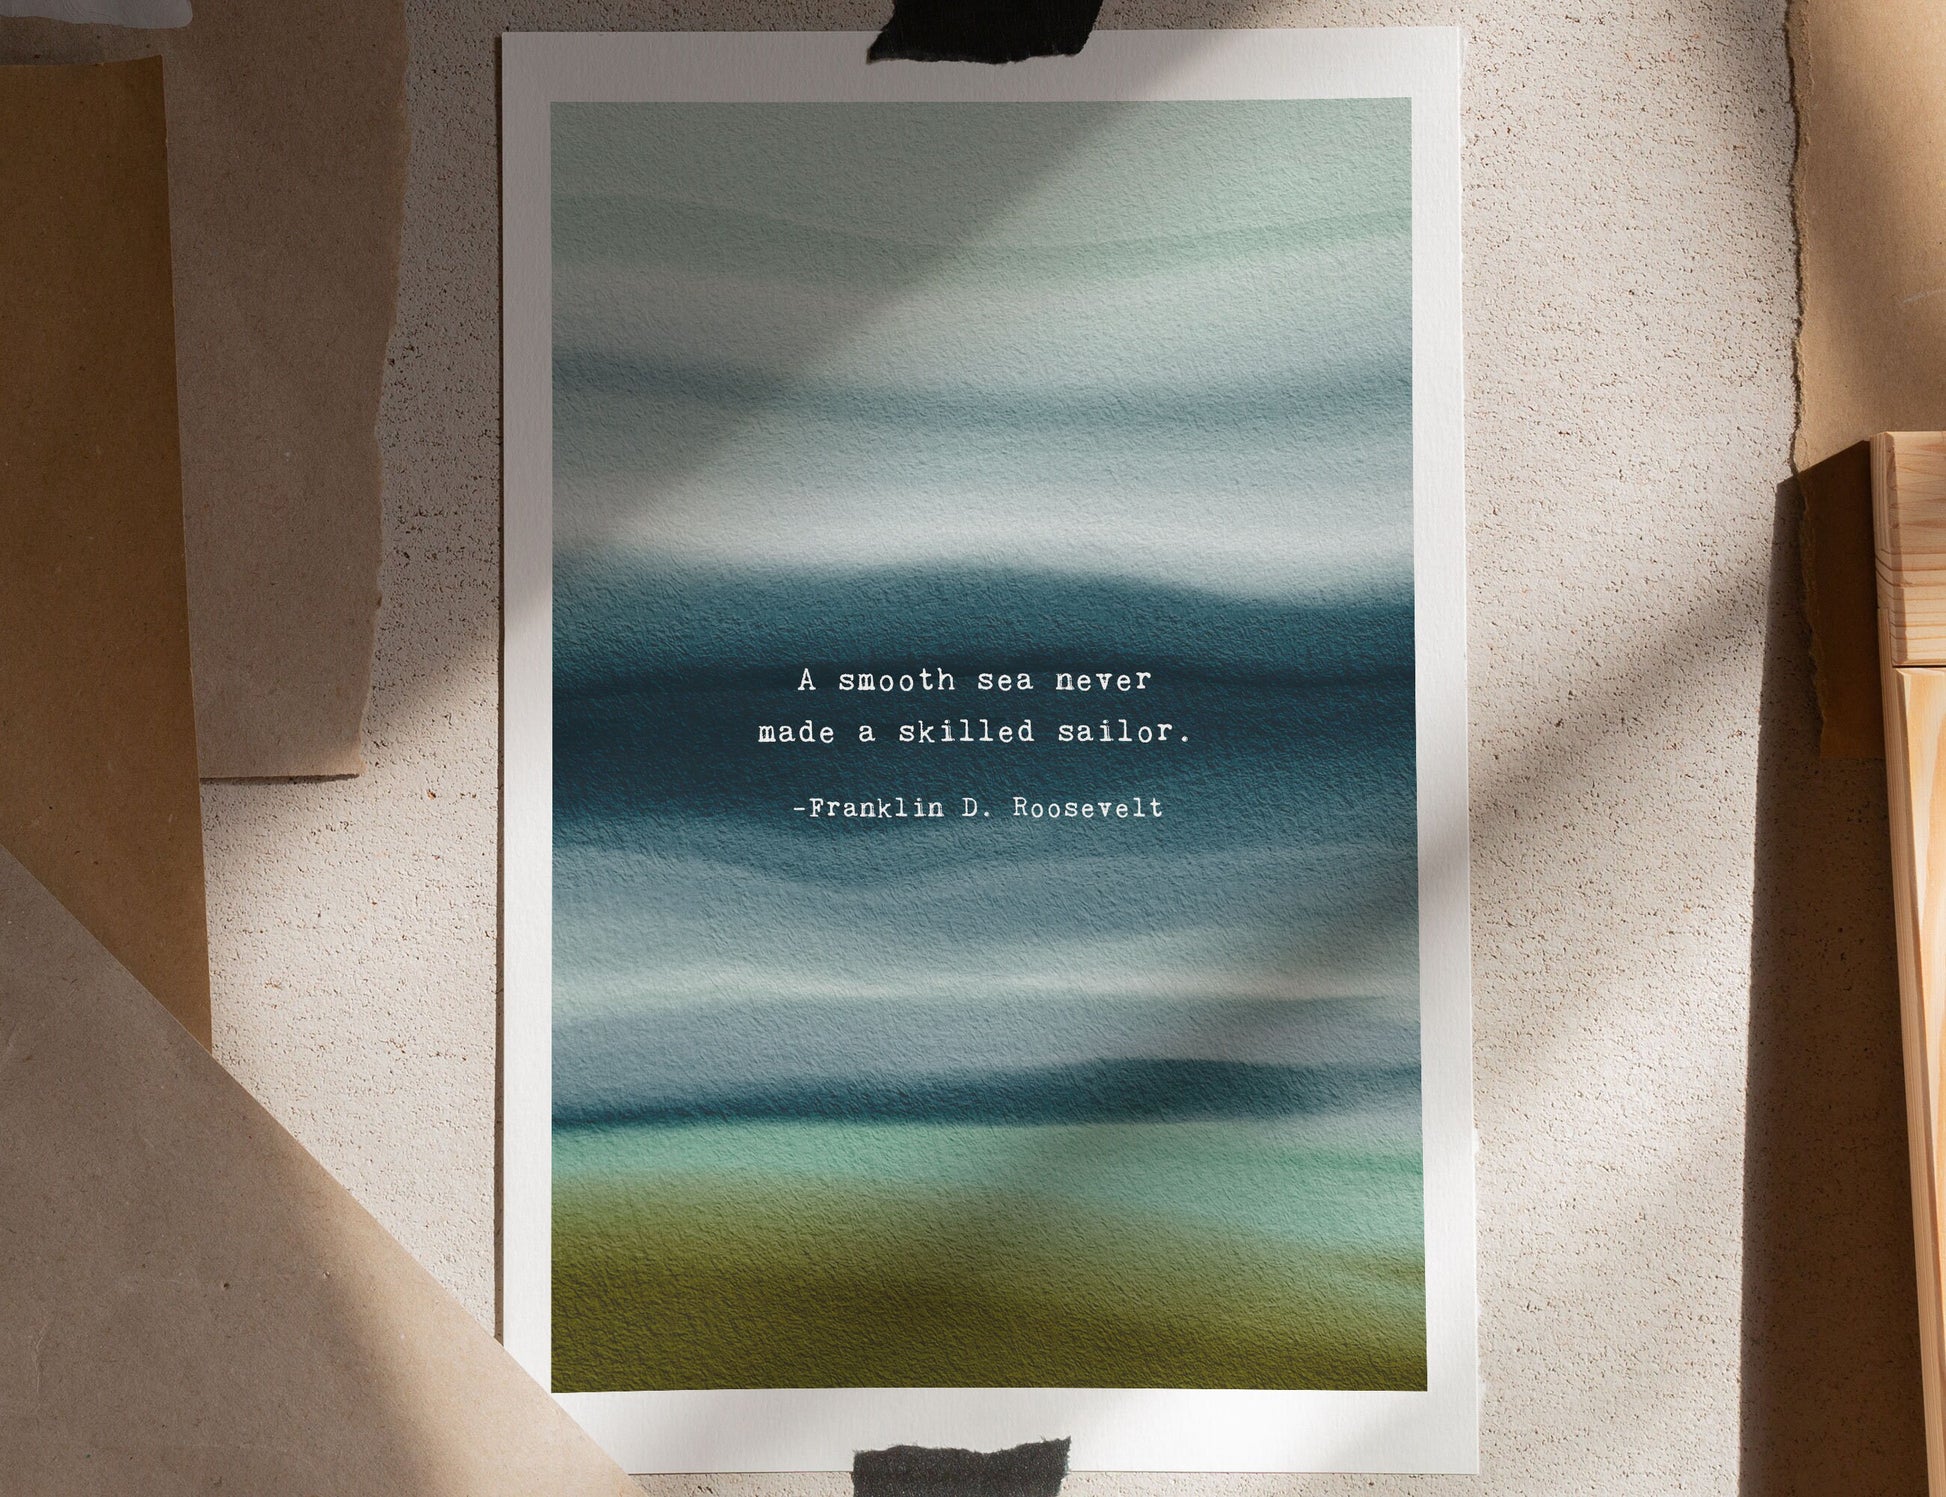 Watercolor wall art featuring a quote by Roosevelt which says "A smooth sea never made a skilled sailer."e